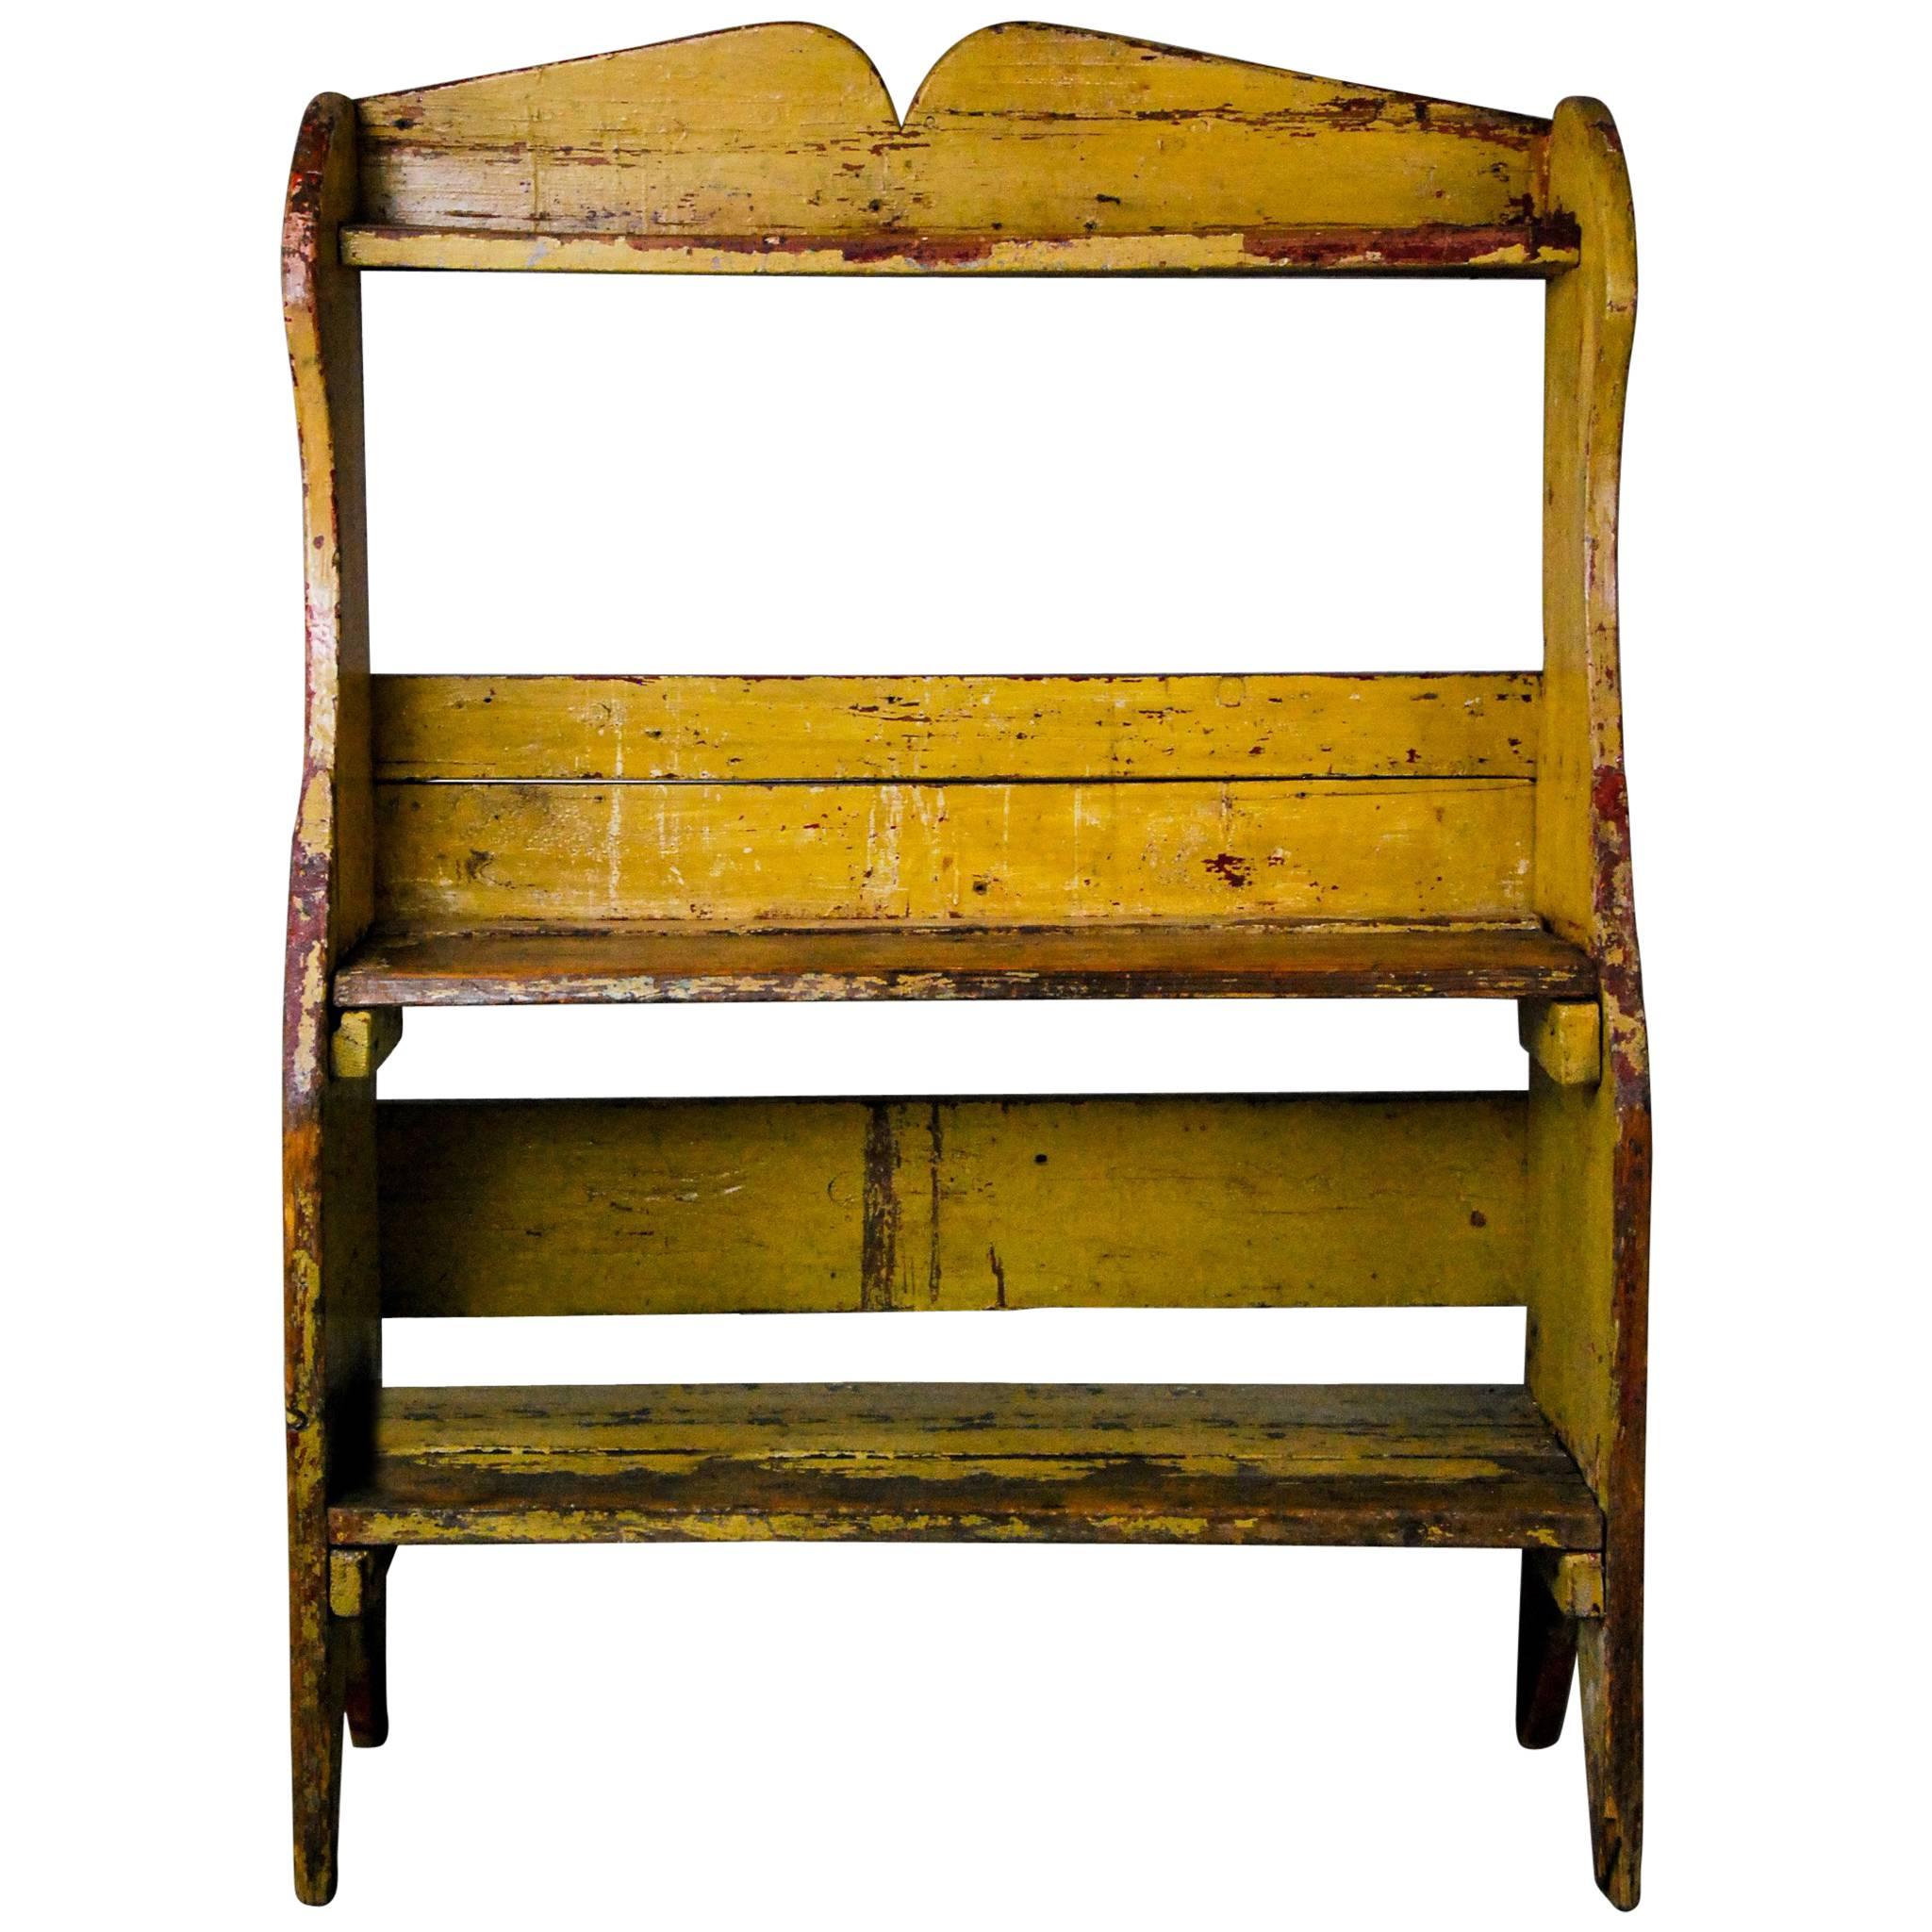 1910 Pine Country Pail Bench in Original Paint